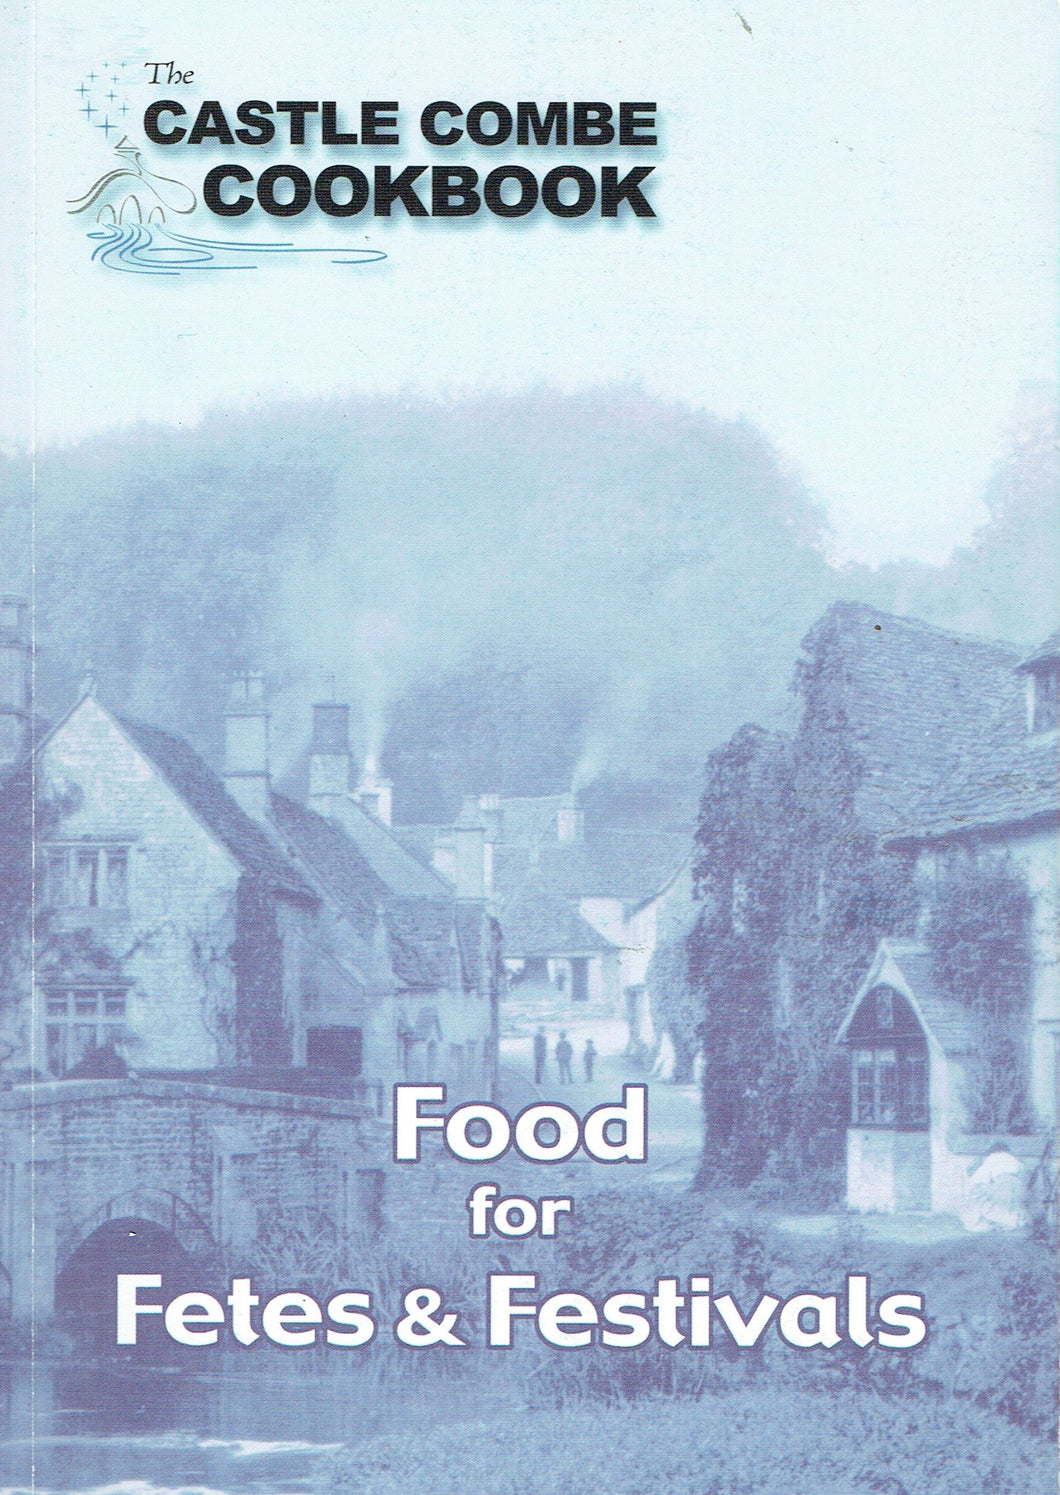 The Castle Combe Cookbook: Food for Fetes and Festivals